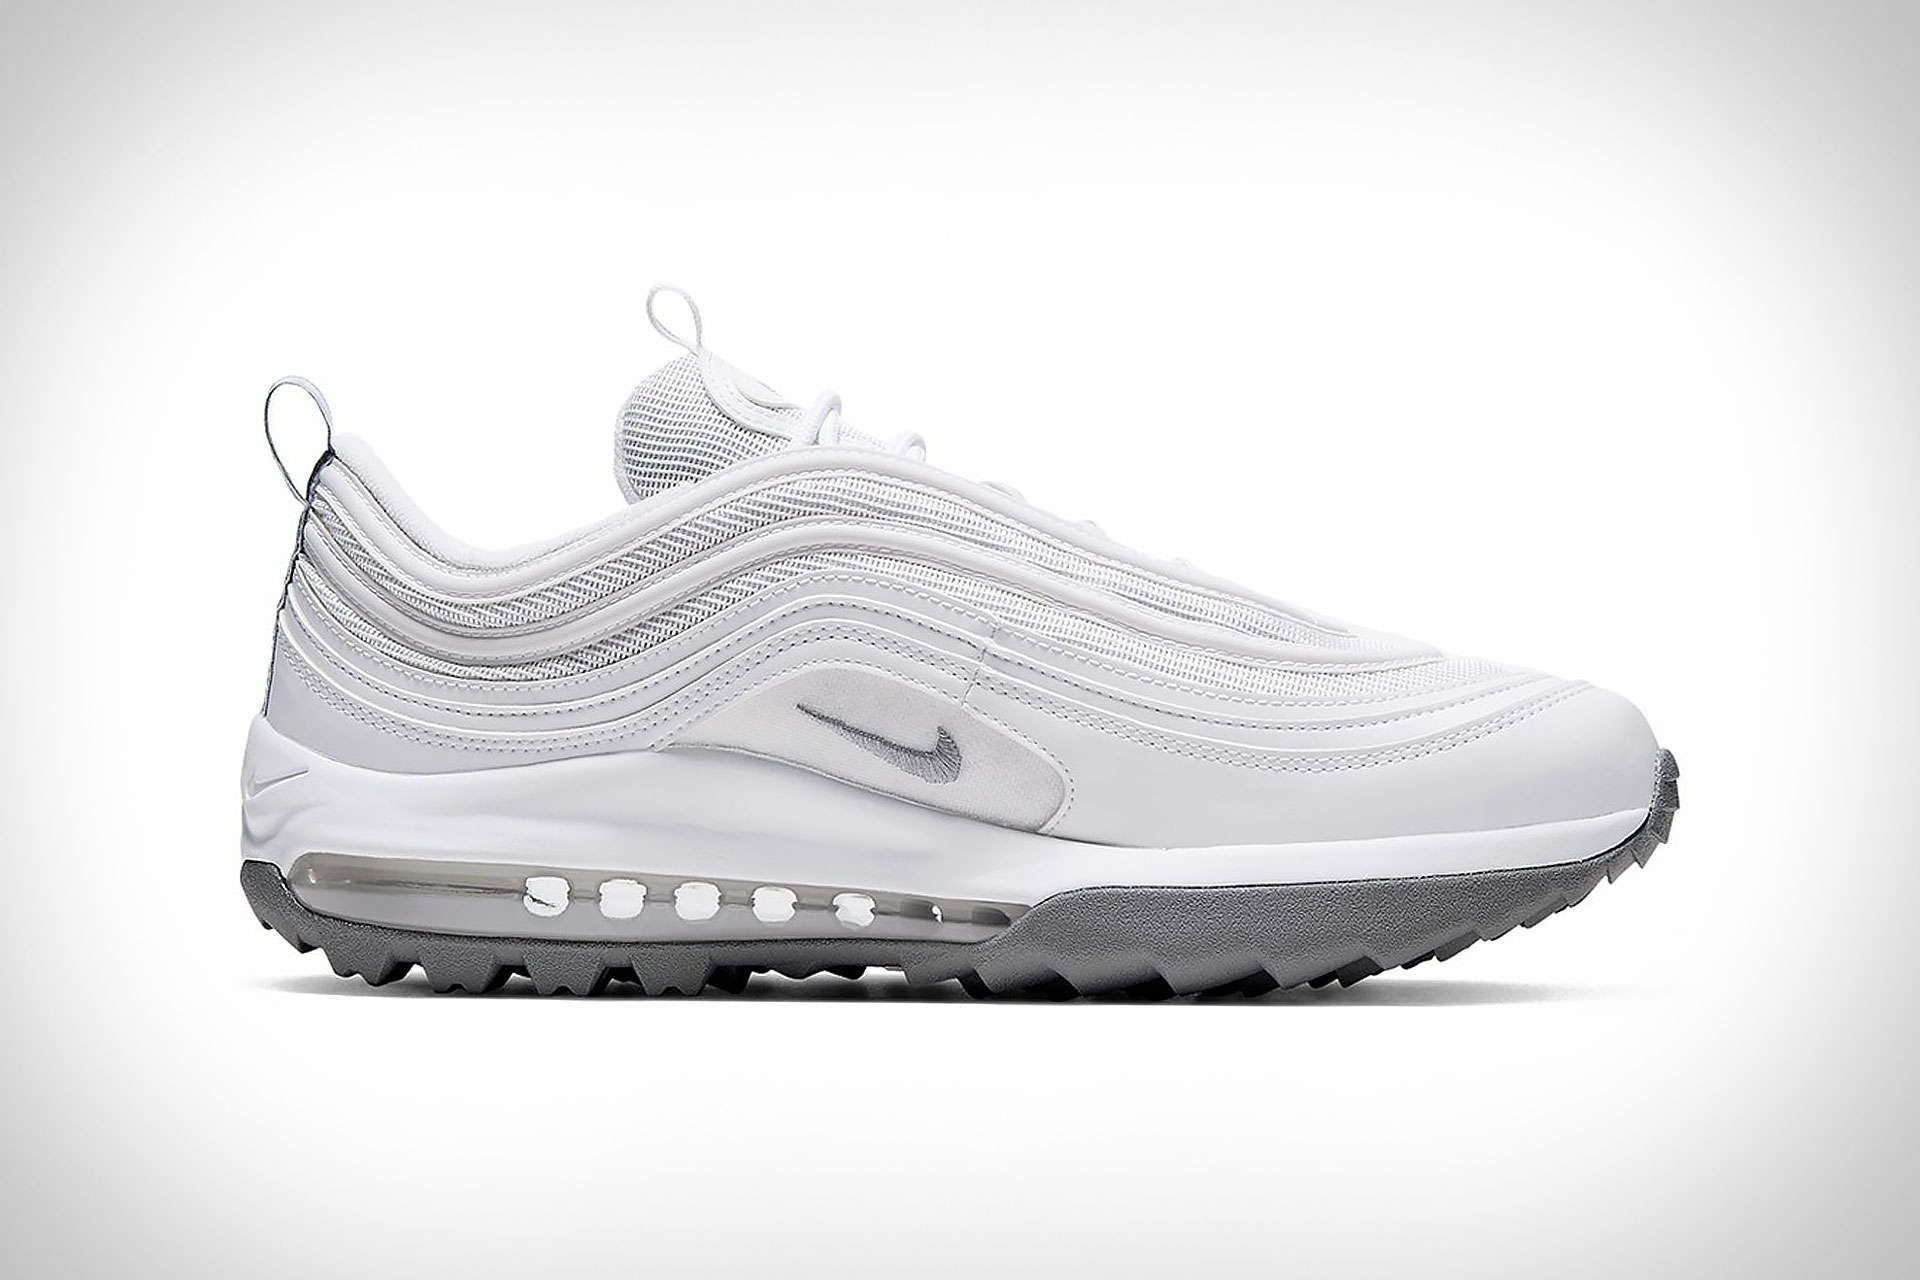 adidas air max 97 for Sale OFF 77%